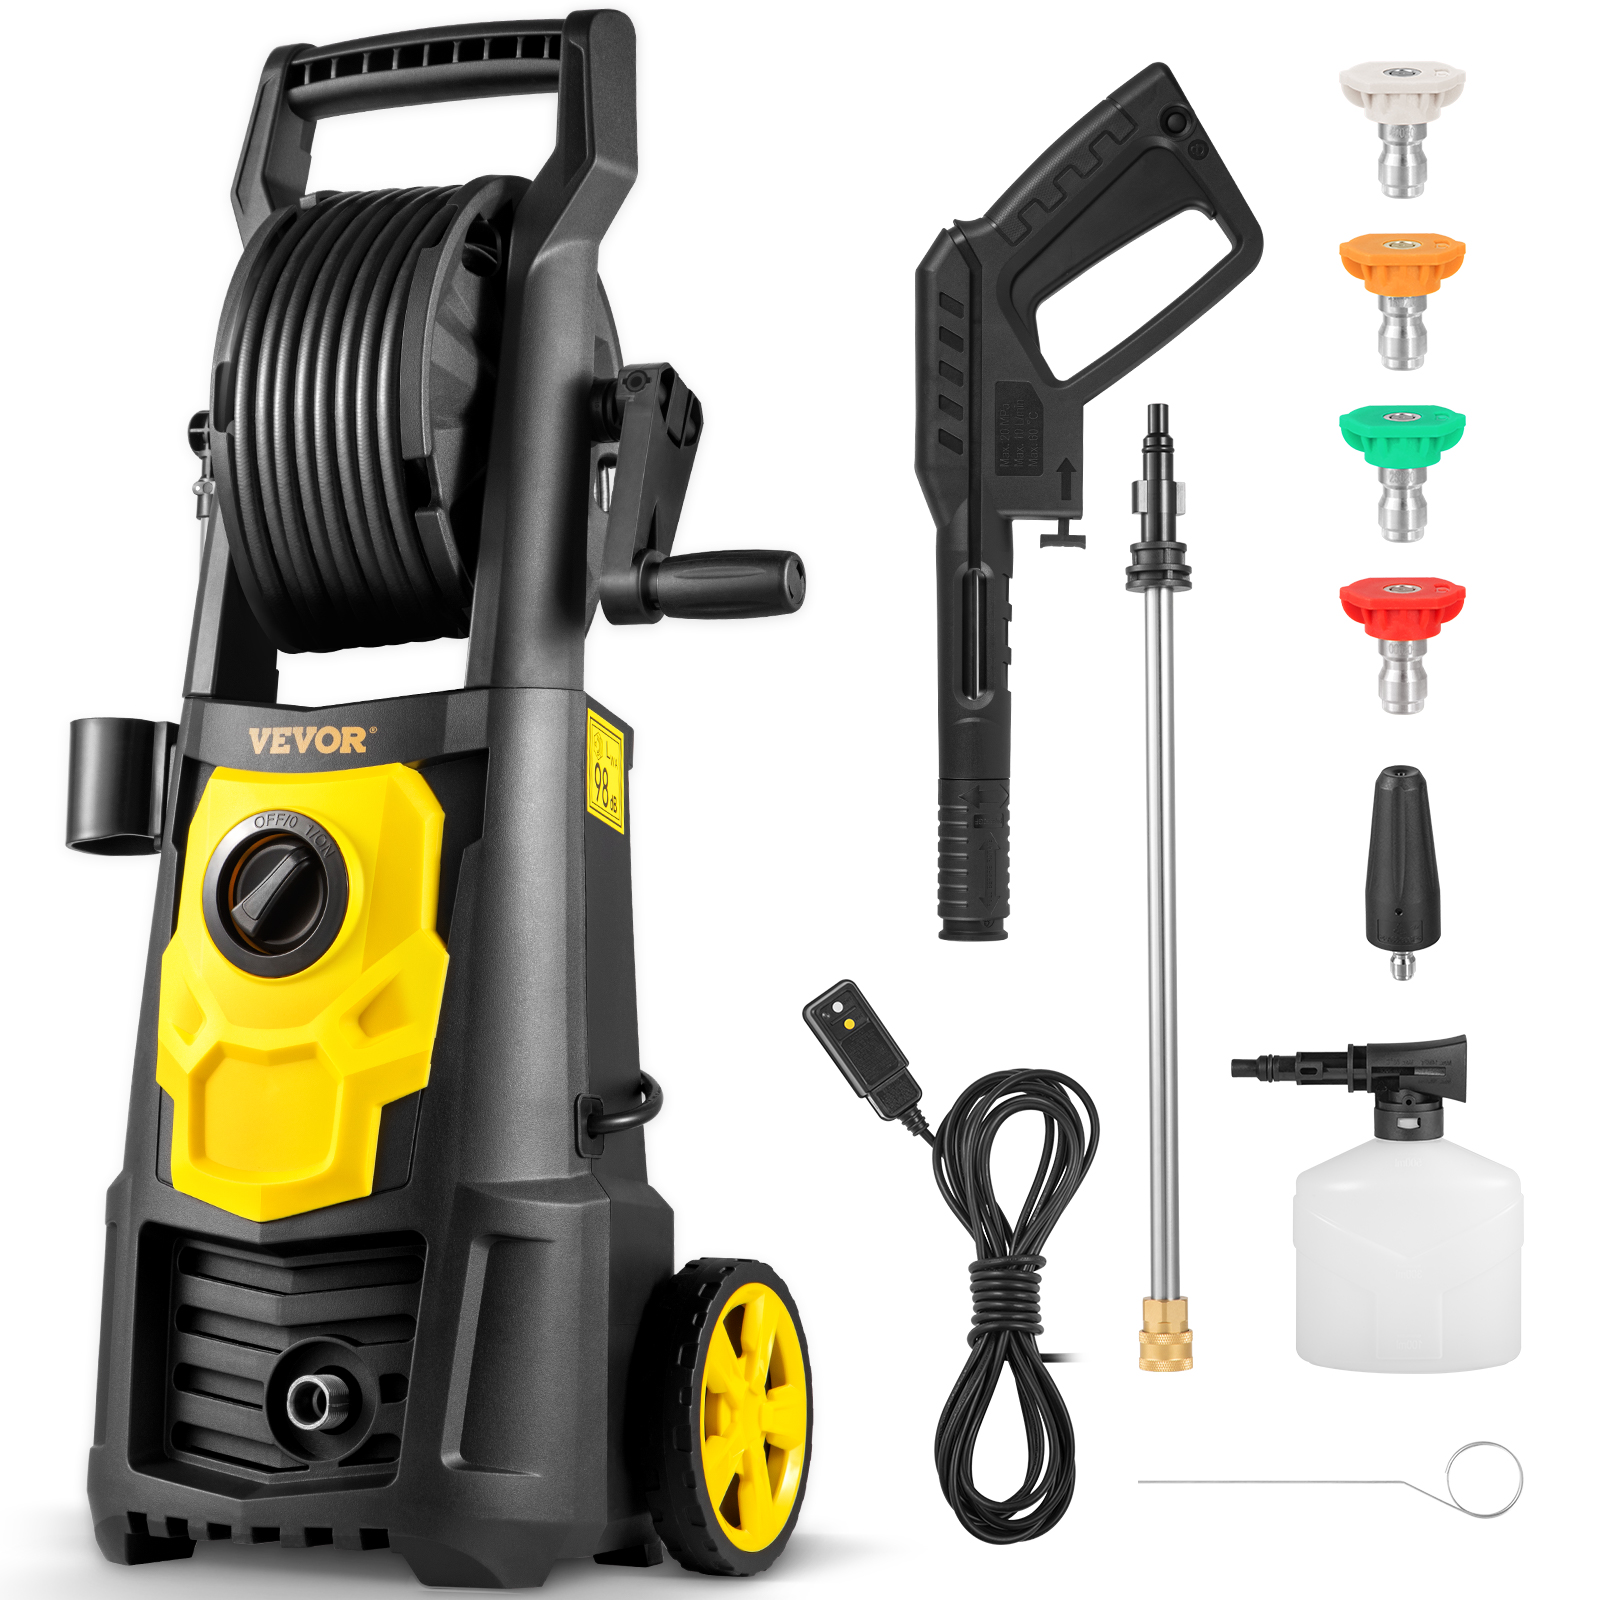 https://d2qc09rl1gfuof.cloudfront.net/product/DDG176GPM110VE5SA/pressure-washer-m100-1.2.jpg